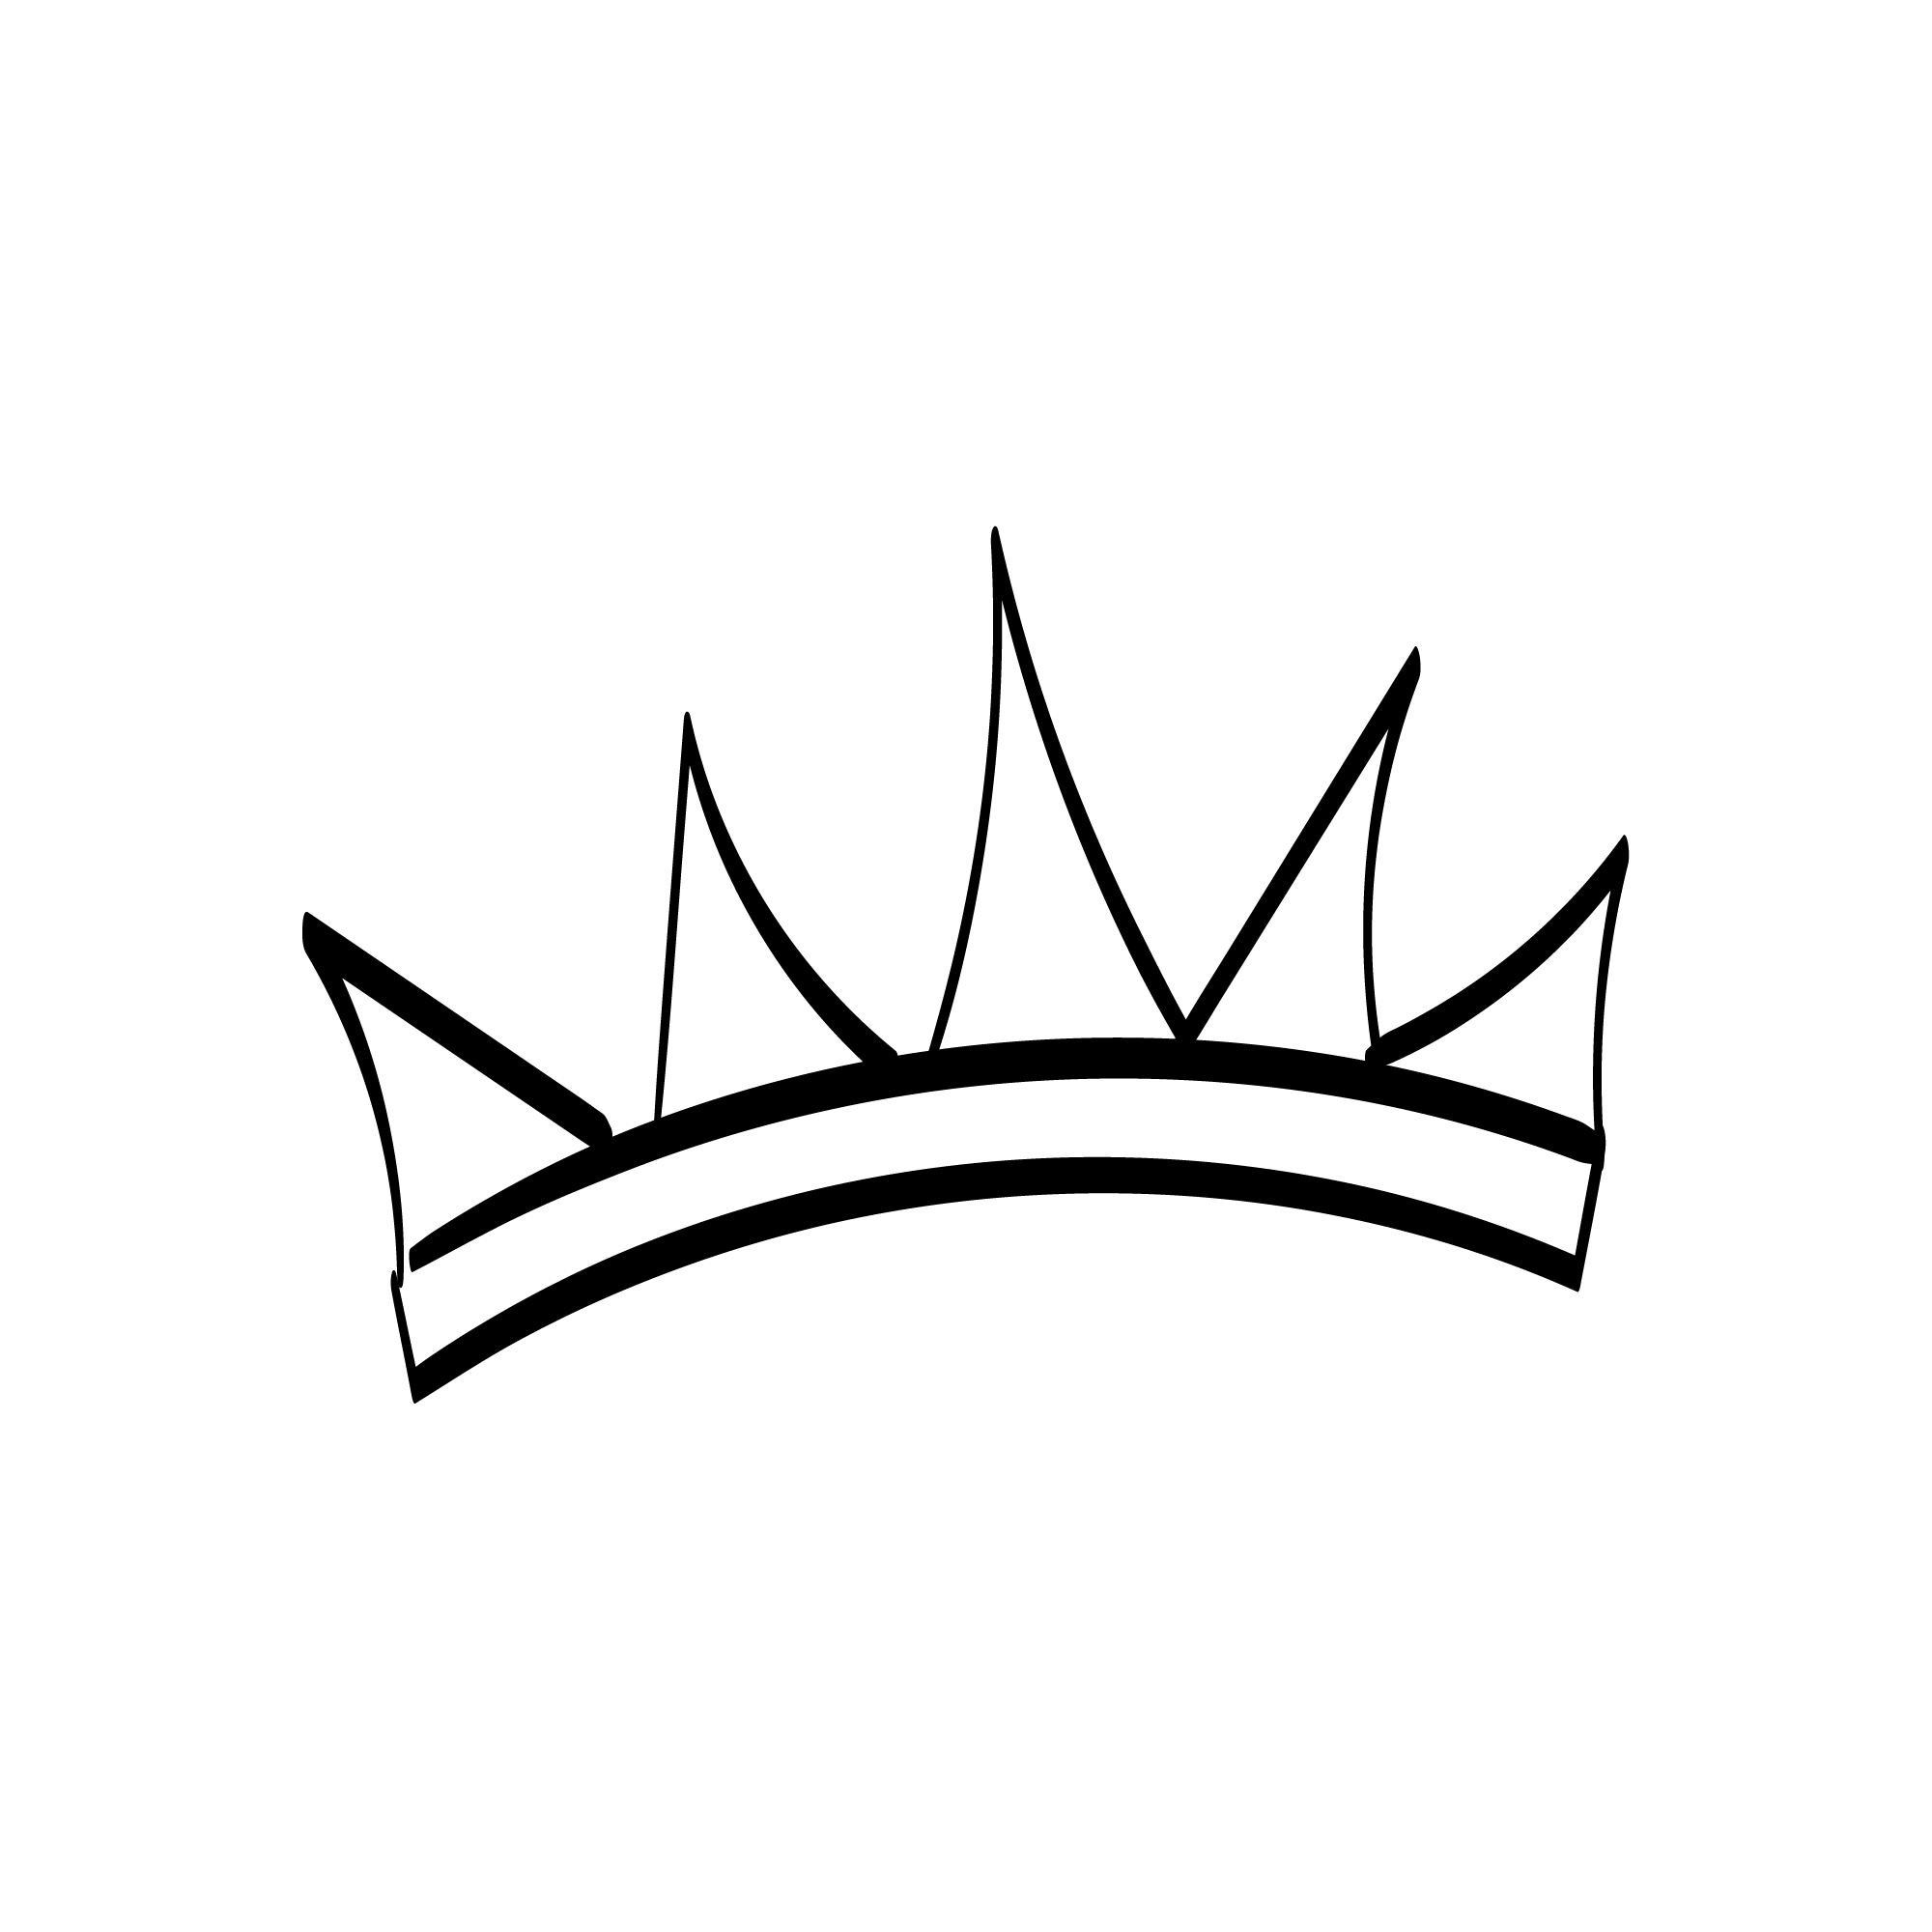 11 Hand Drawn Doodle Crowns for your ideas.